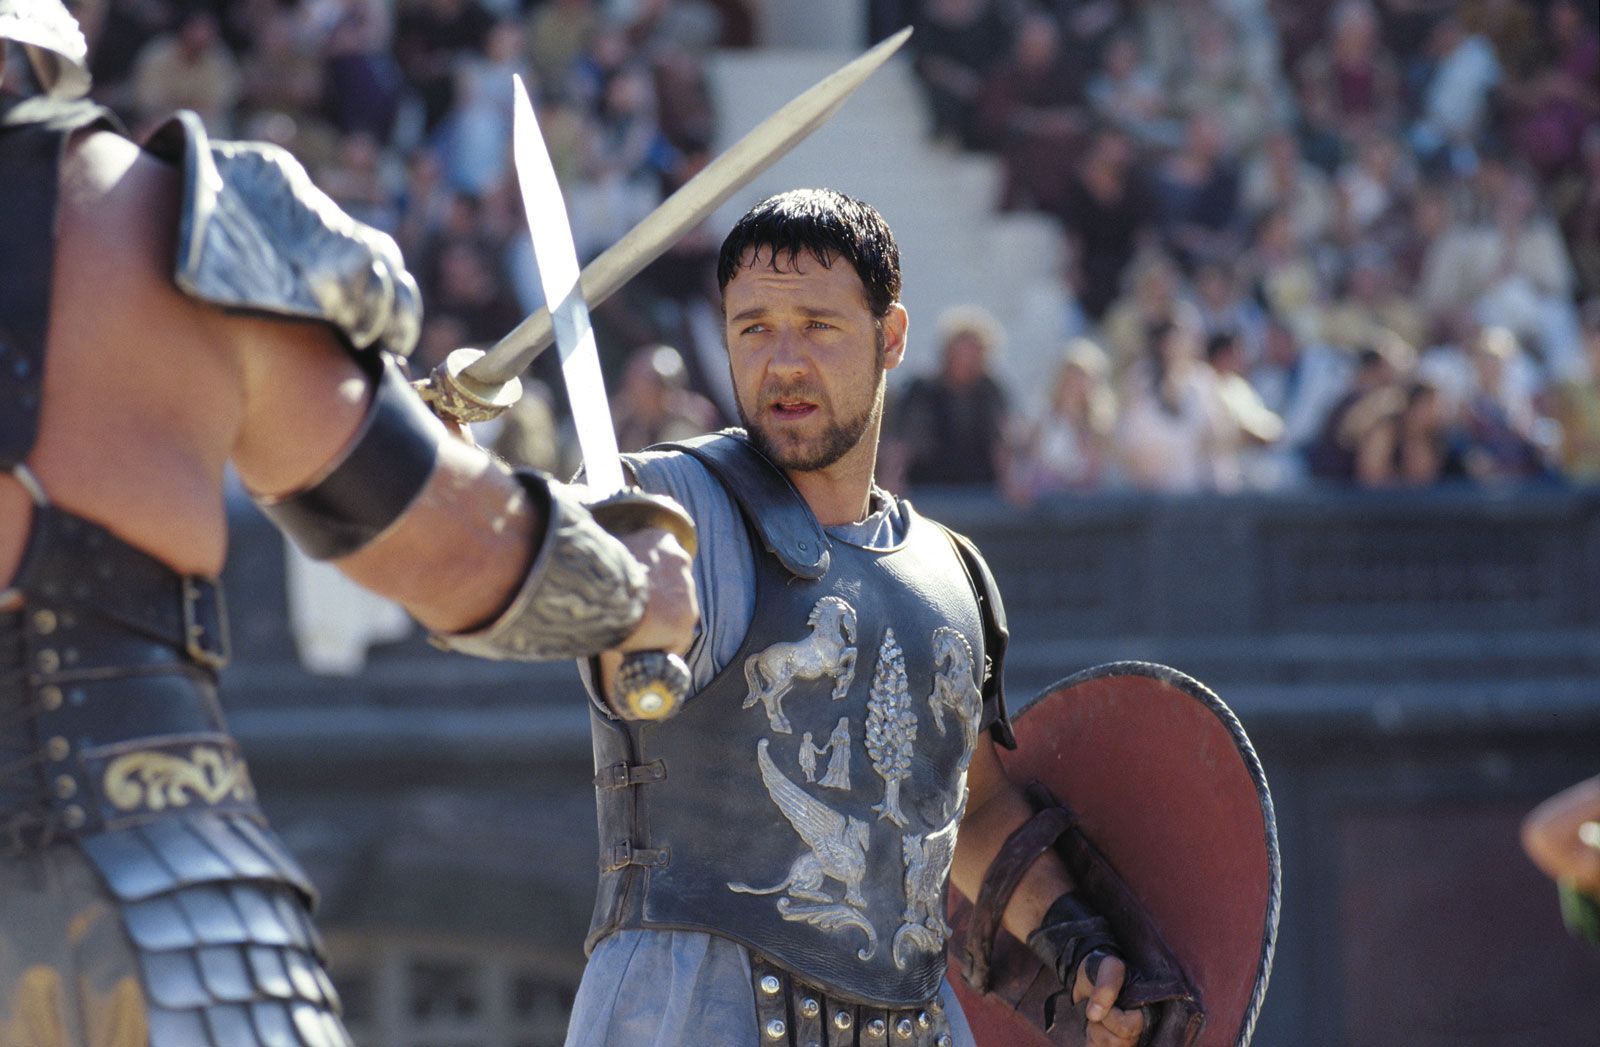 Gladiator 2 Promises Thrilling Action and Compelling New Characters